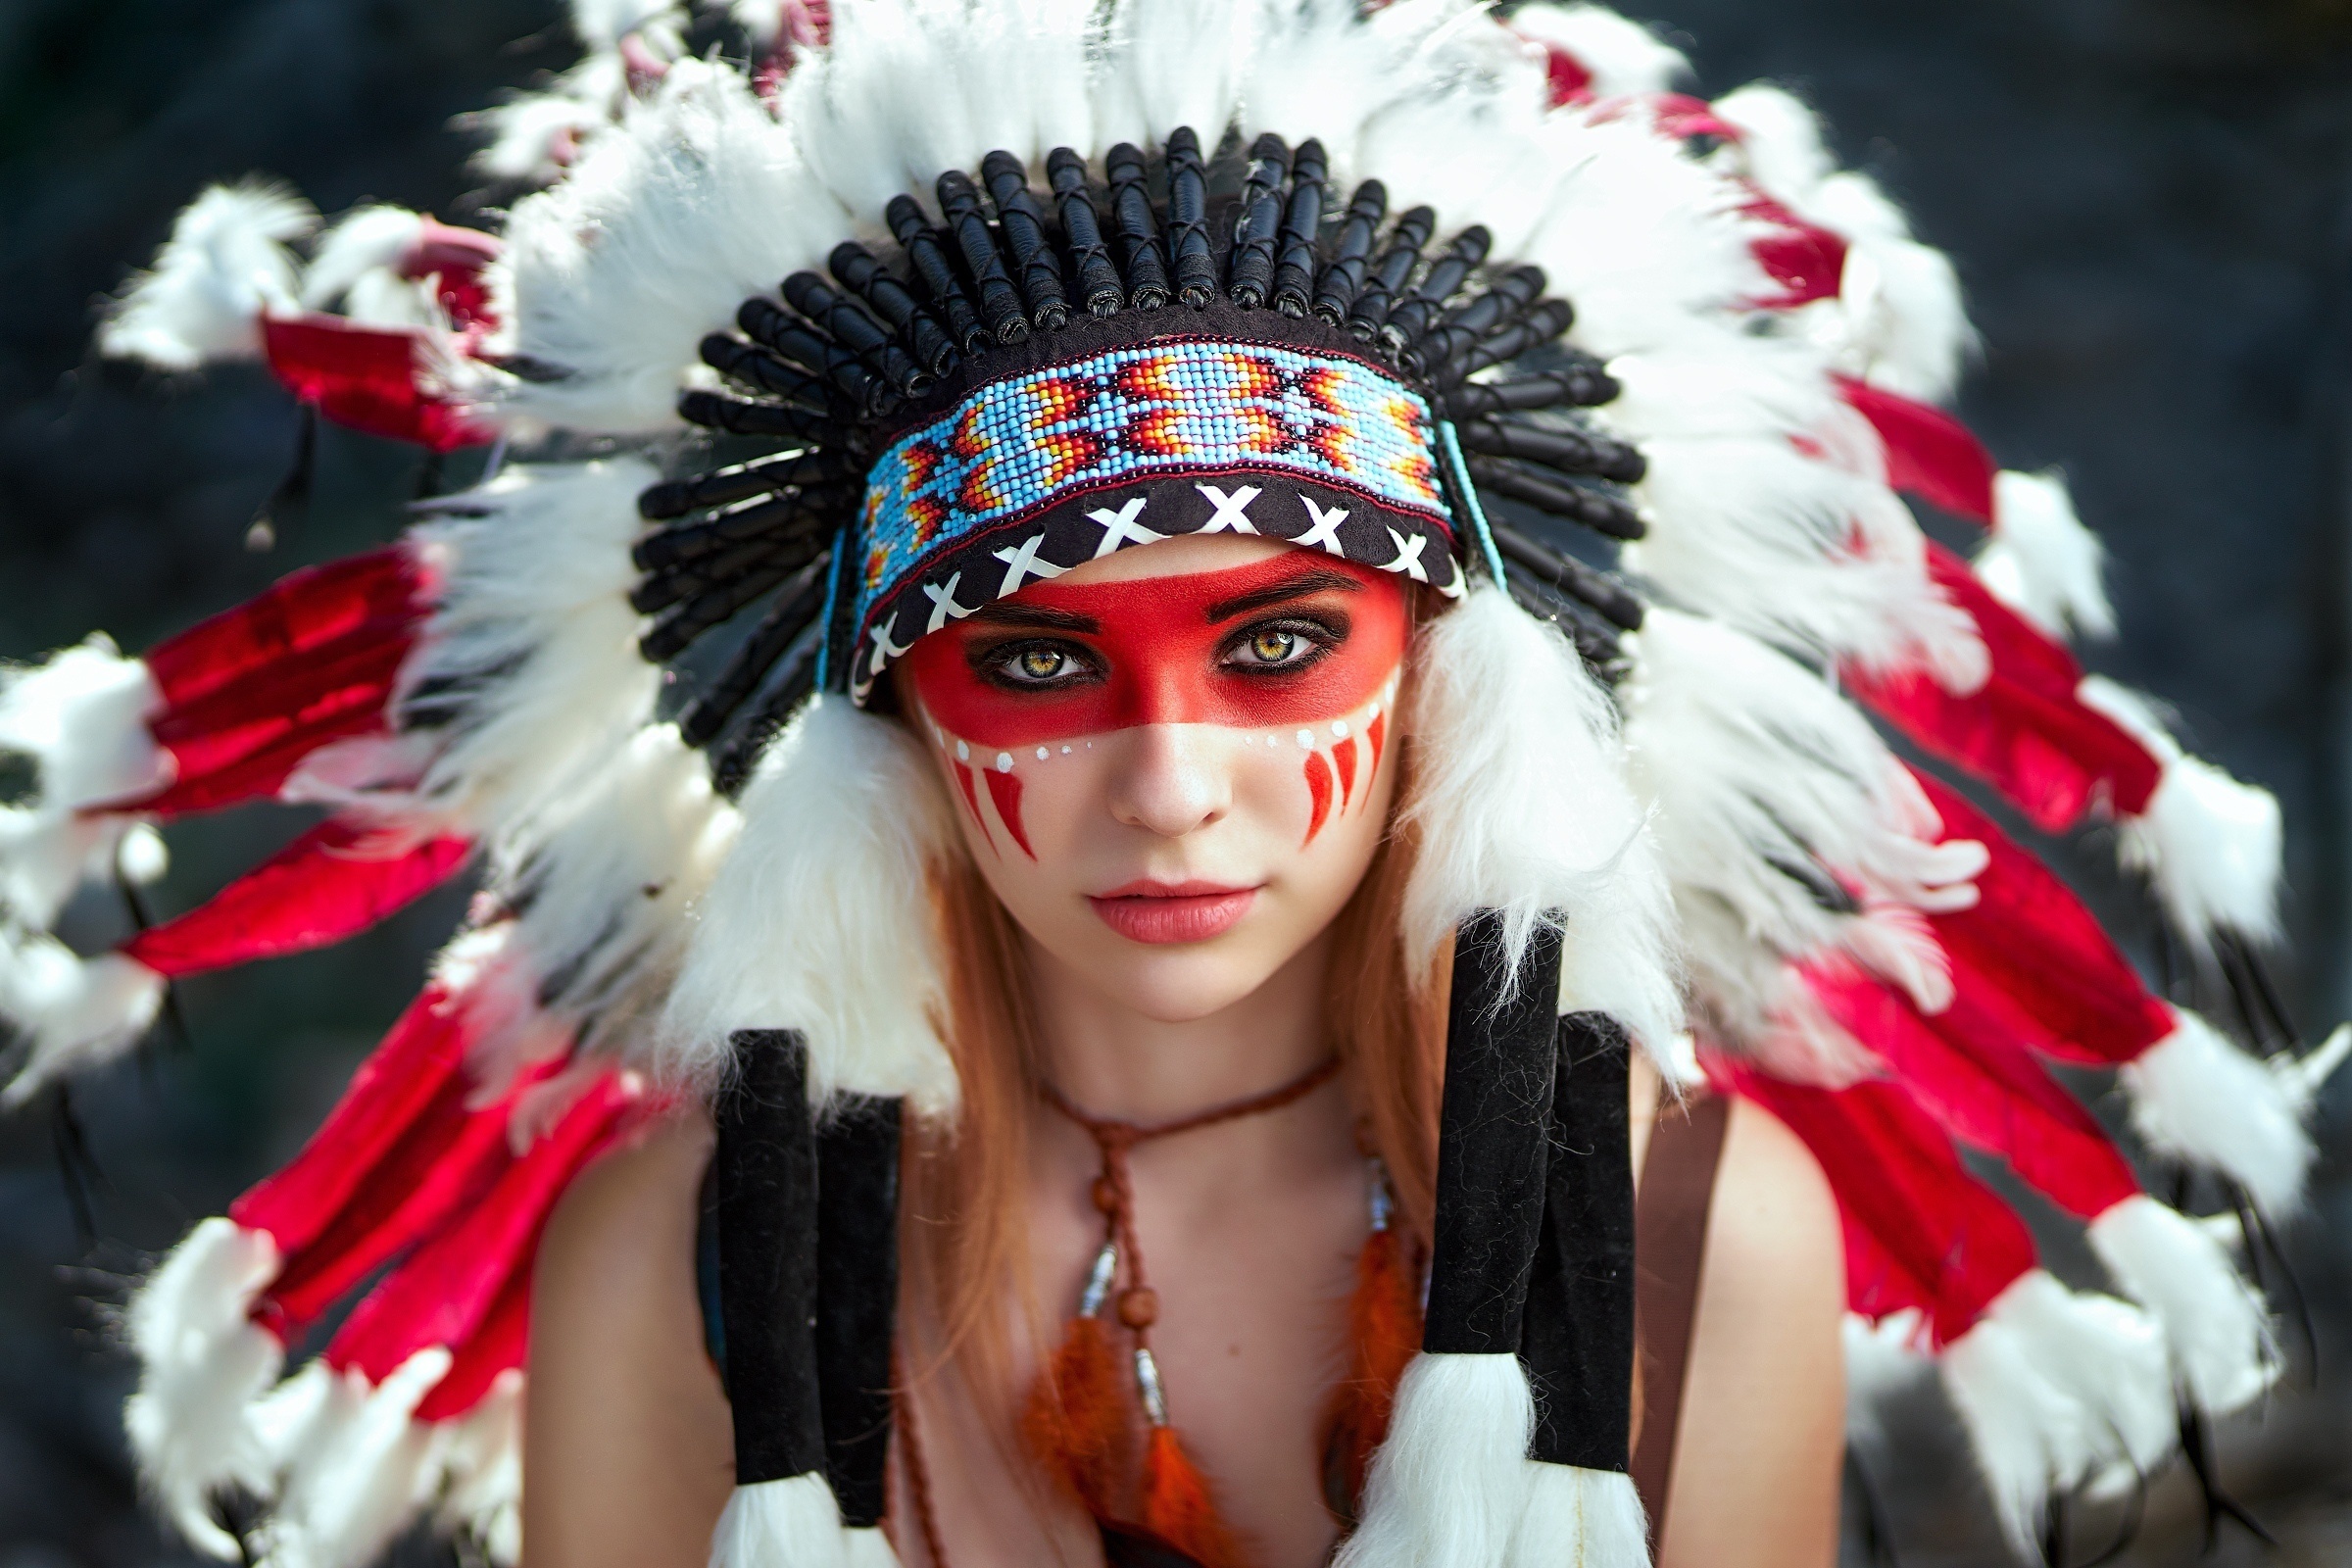 Women Feathers Native American Clothing Face Paint 2400x1600